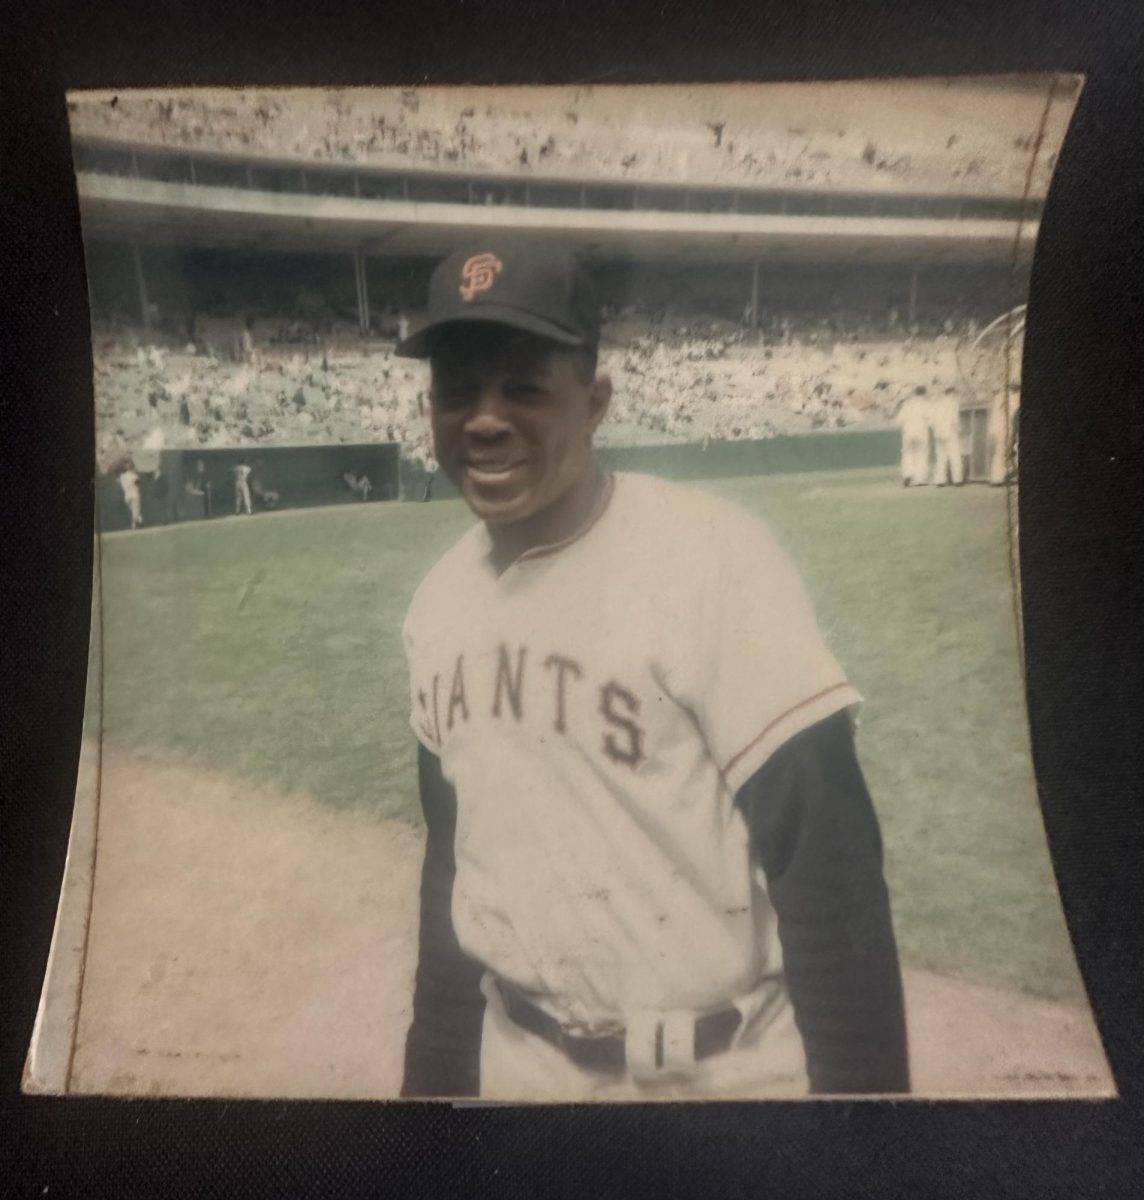 Willie+Mays+was+an+American+icon+who+is+often+considered+to+be+one+of+the+greatest+baseball+players+to+ever+live.+This+photo+was+taken+at+Candlestick+Park+in+1966+by+Marie+Weiss%2C+grandmother+of+The+Crusader+adviser+Susan+Sutton.+